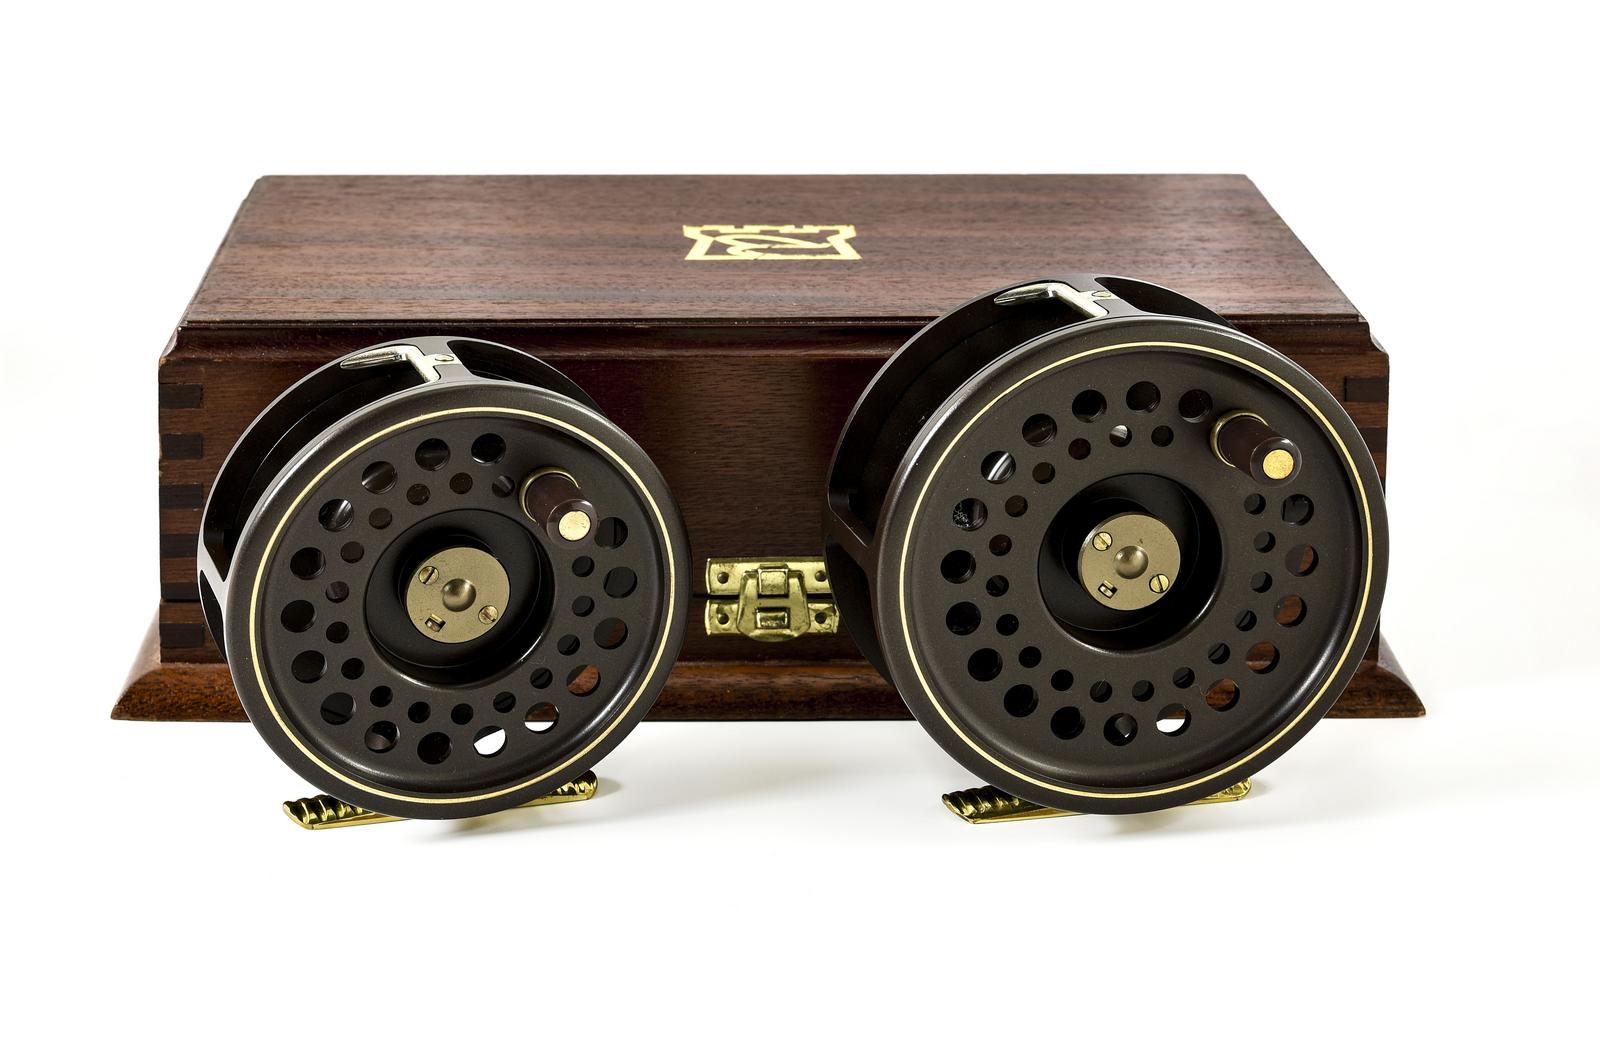 FIRST EDITION HARDY 'The Golden Prince' Fly Fishing Reel with